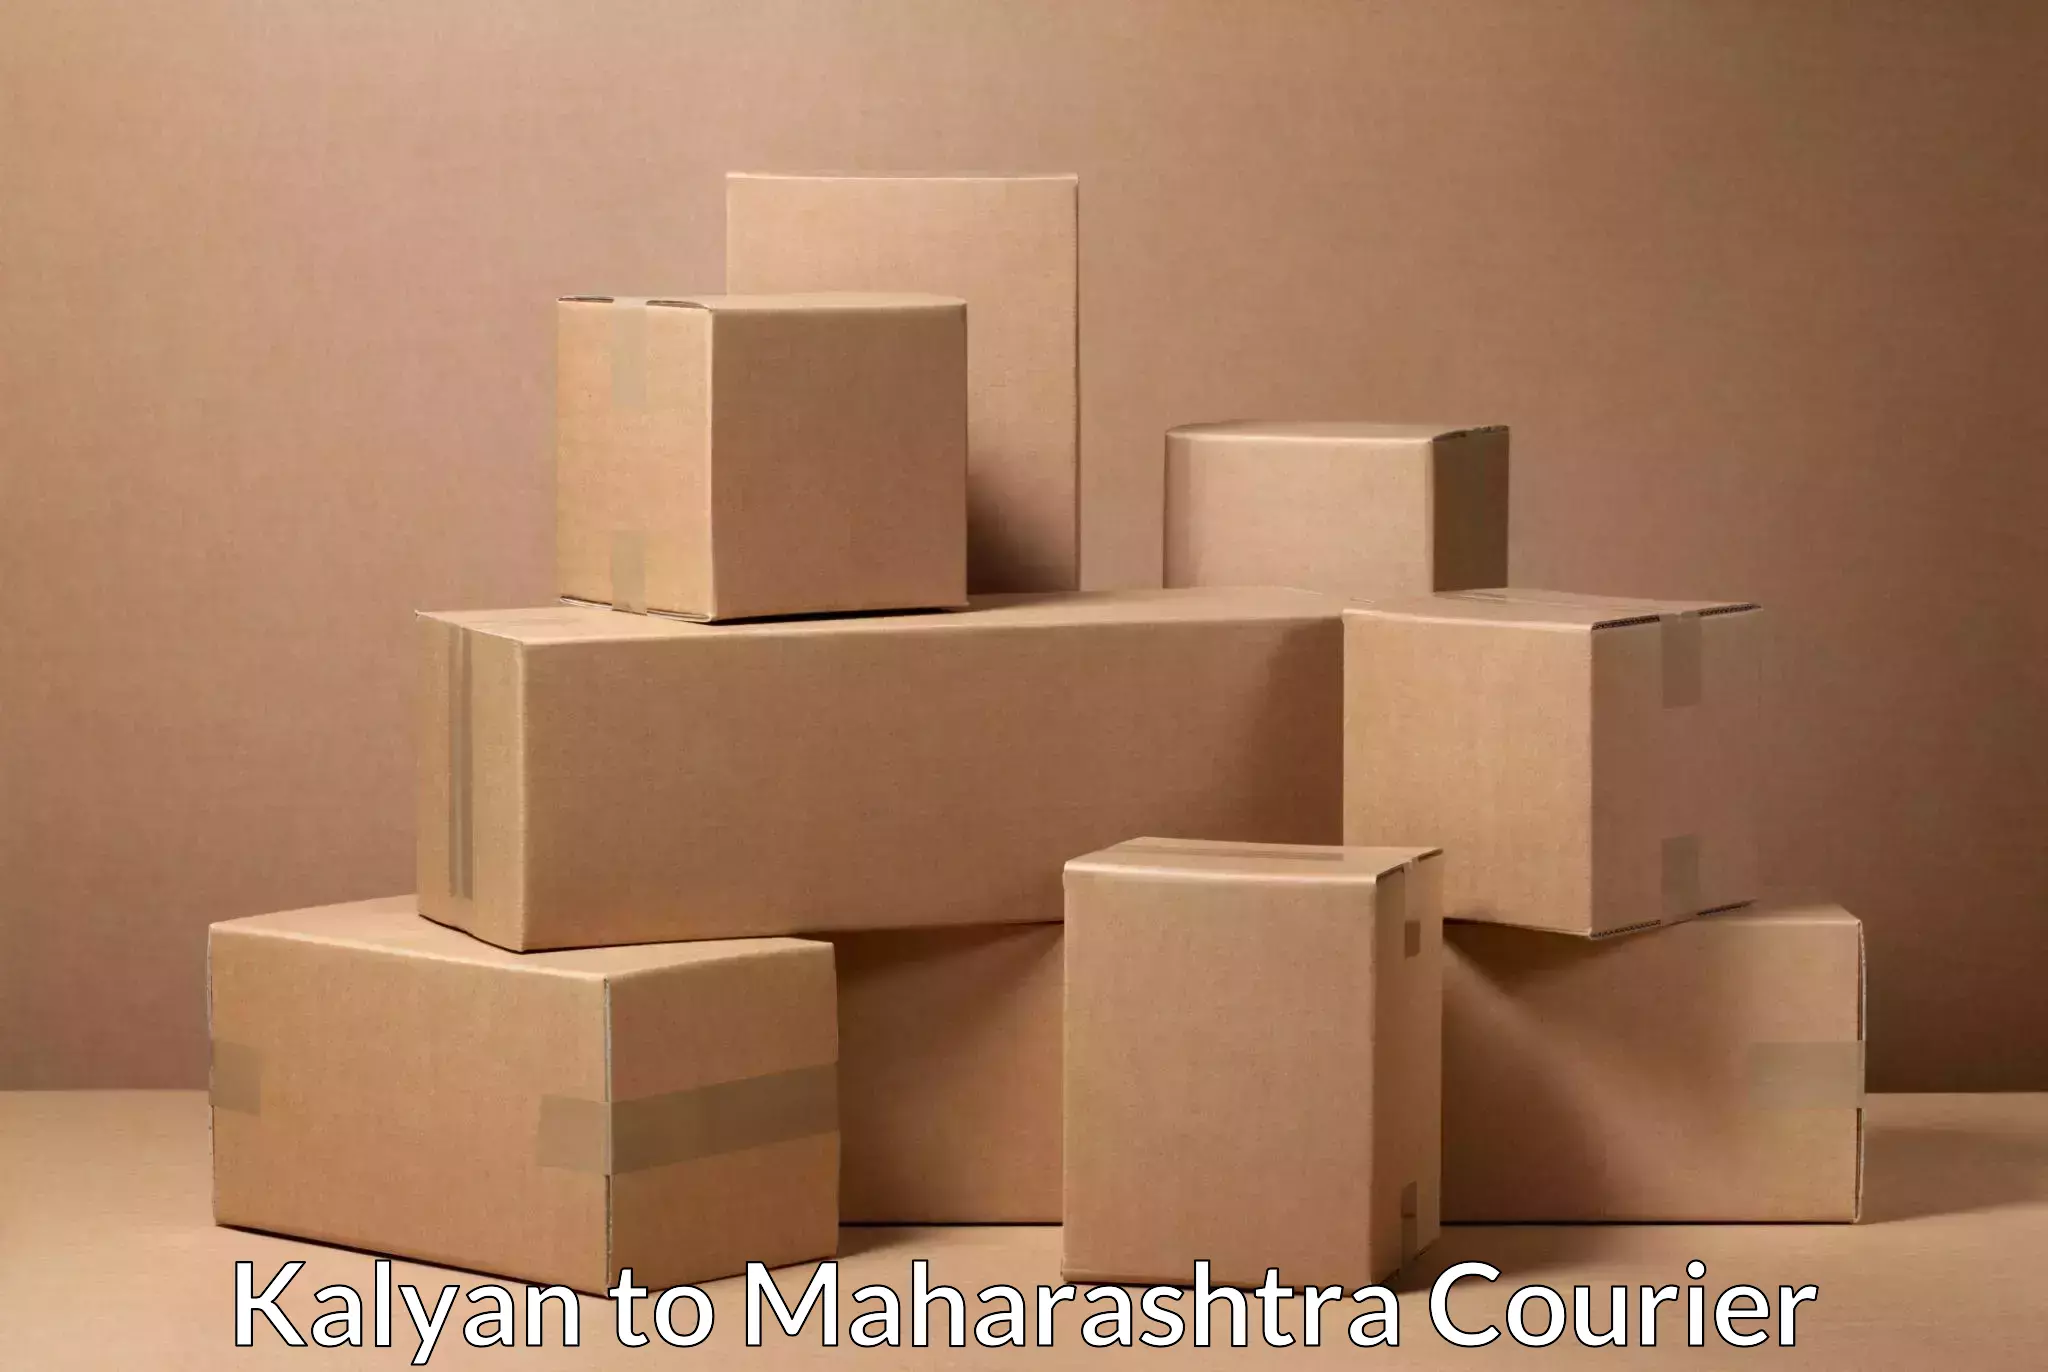 Corporate courier solutions Kalyan to Pune